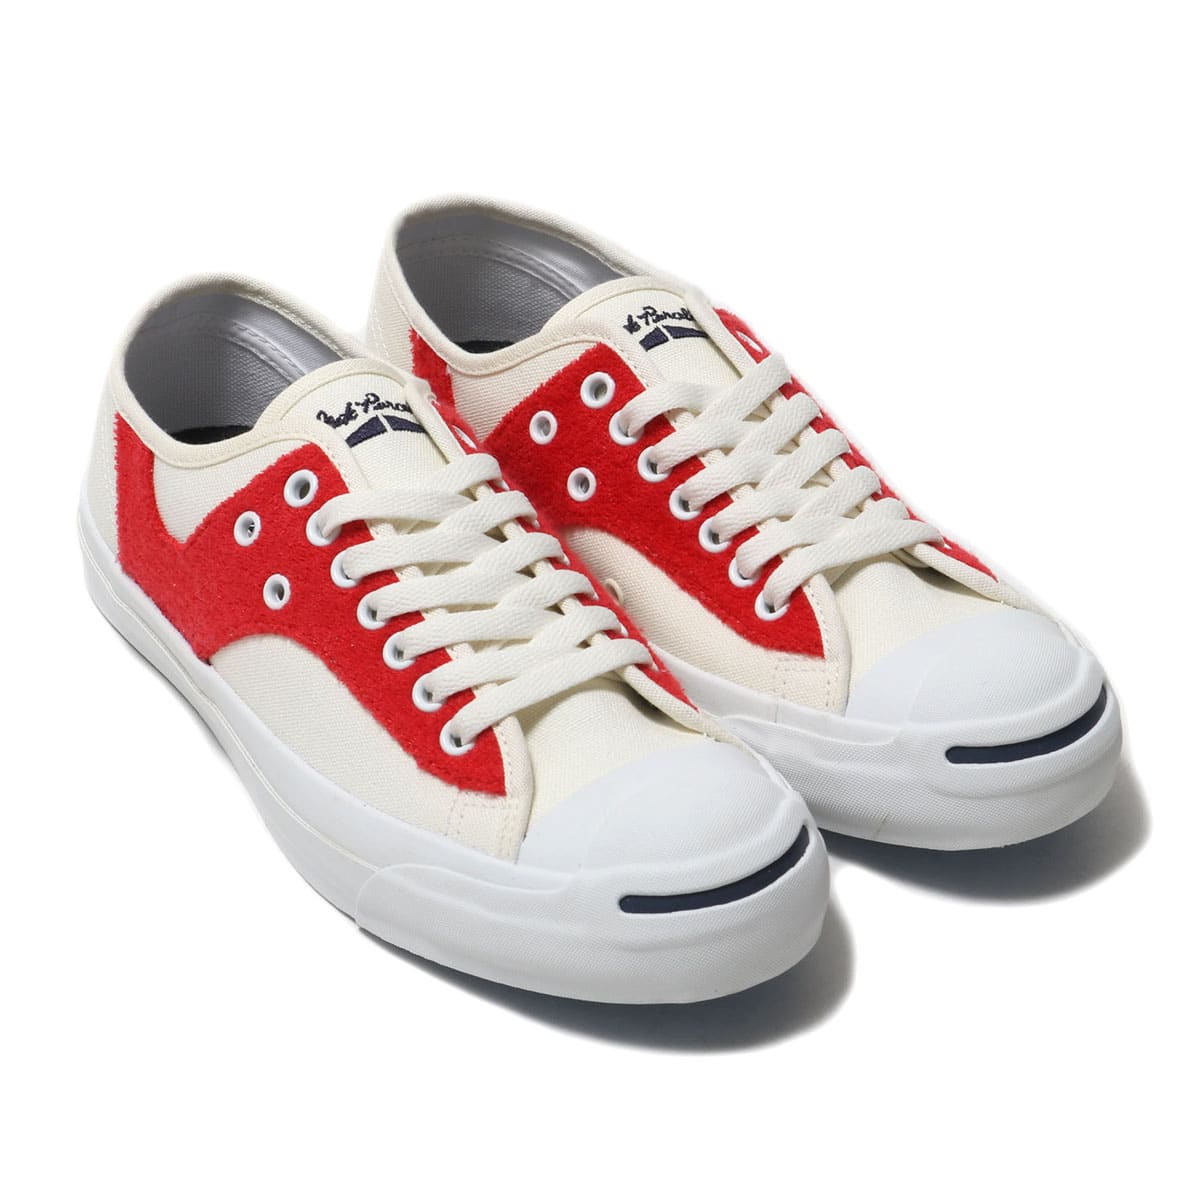 CONVERSE JACK PURCELL RLYLP RH ホワイト/レ 